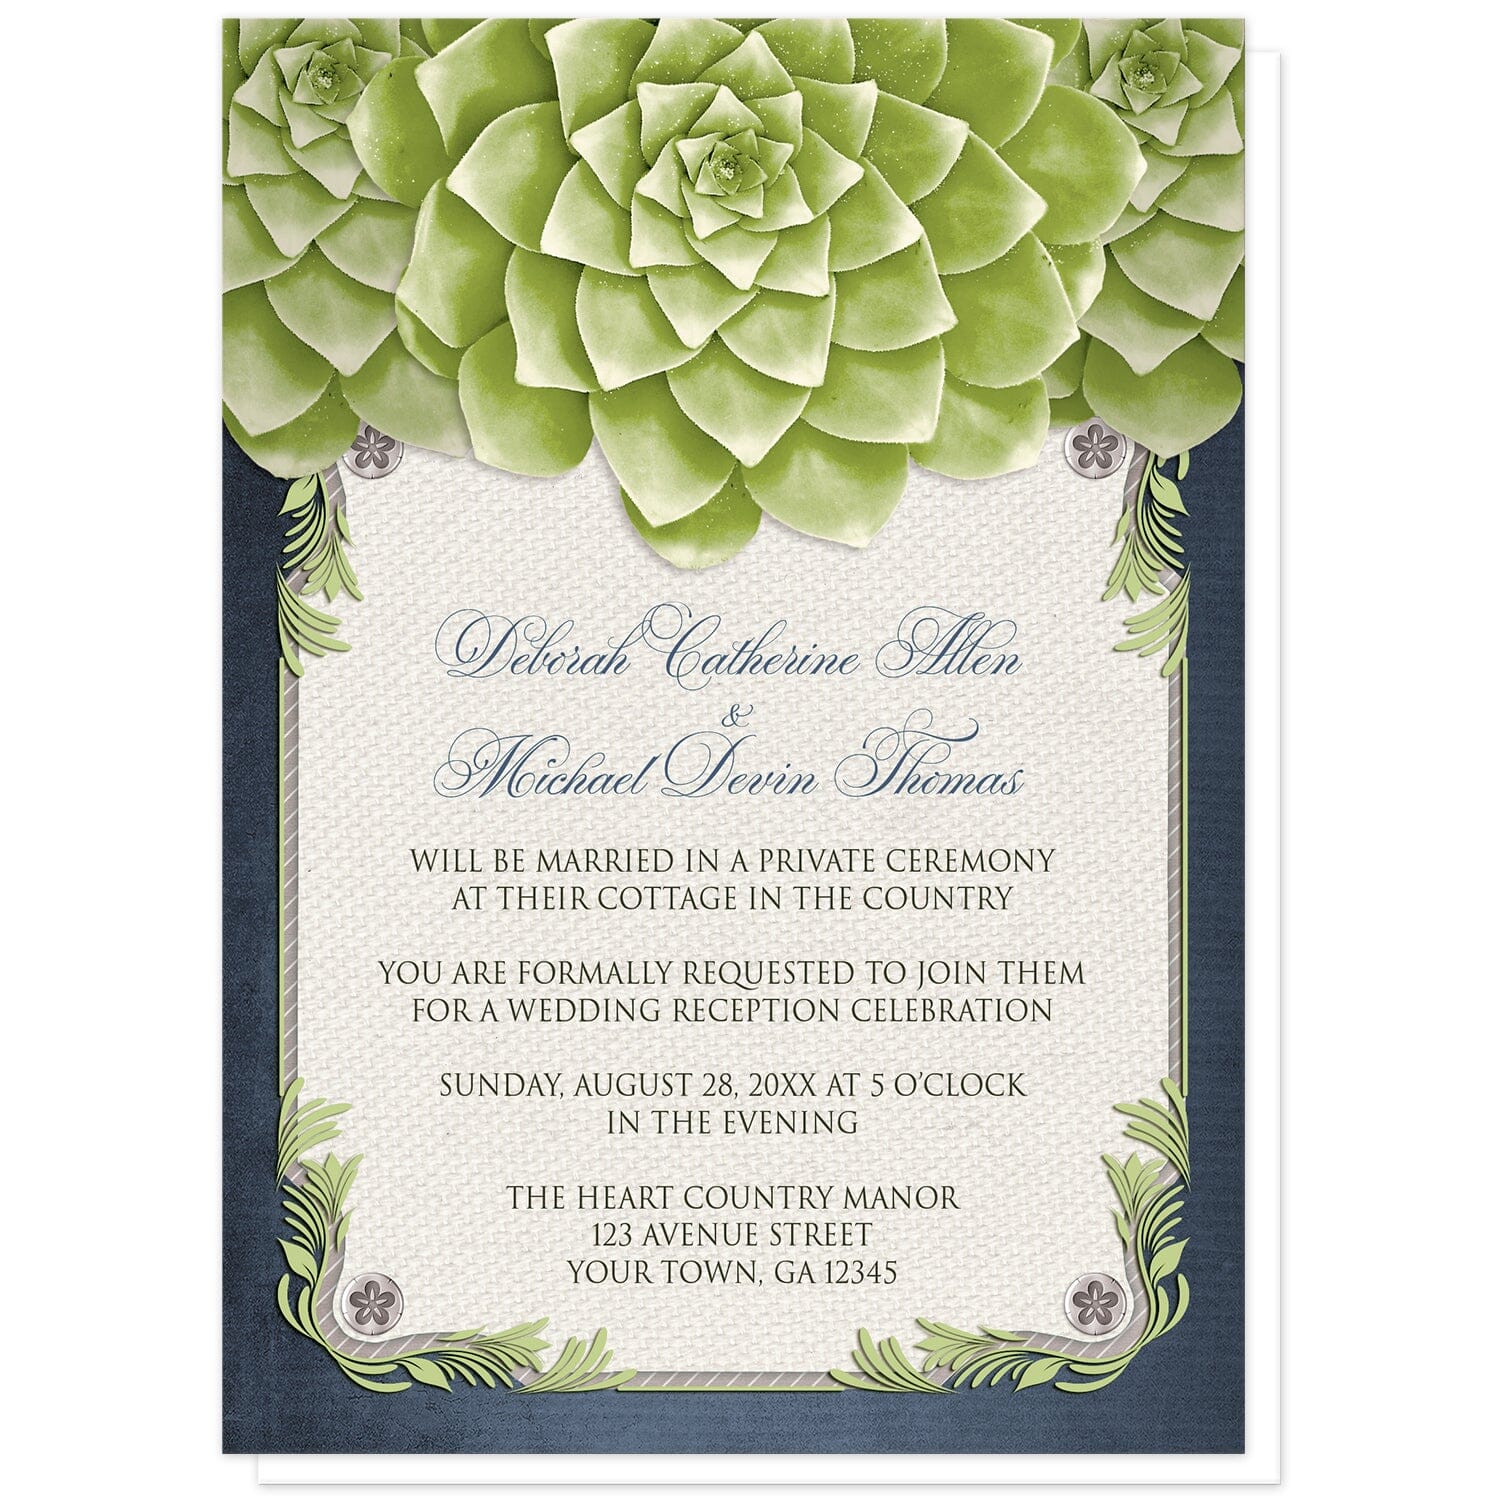 Rustic Succulent Garden Navy Reception Only Invitations at Artistically Invited. Invites with three large and lovely green succulents along the top over a beige canvas texture illustration framed with a leafy green decorative border, striped gray, and four floral metal pin illustrations, all over a navy blue background along the edges. Your personalized post-wedding reception details are custom printed in dark gray and navy blue over the beige canvas background in the center area below the succulents.